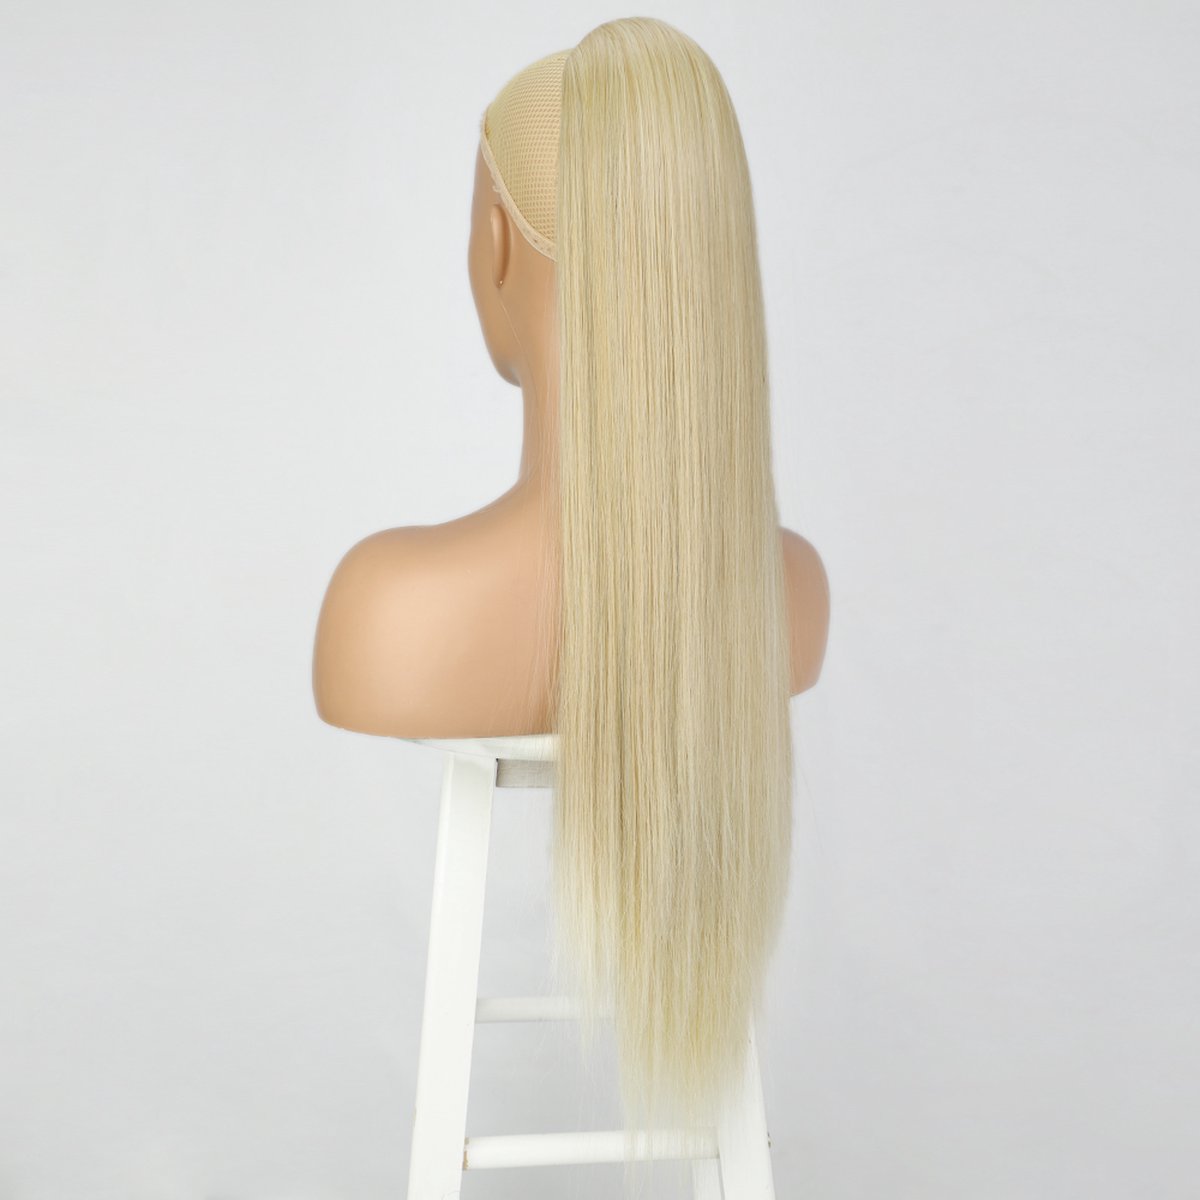 Miss Ponytails - Straight ponytail extentions - 26 inch - Blond 24-613 - Hair extentions - Haarverlenging